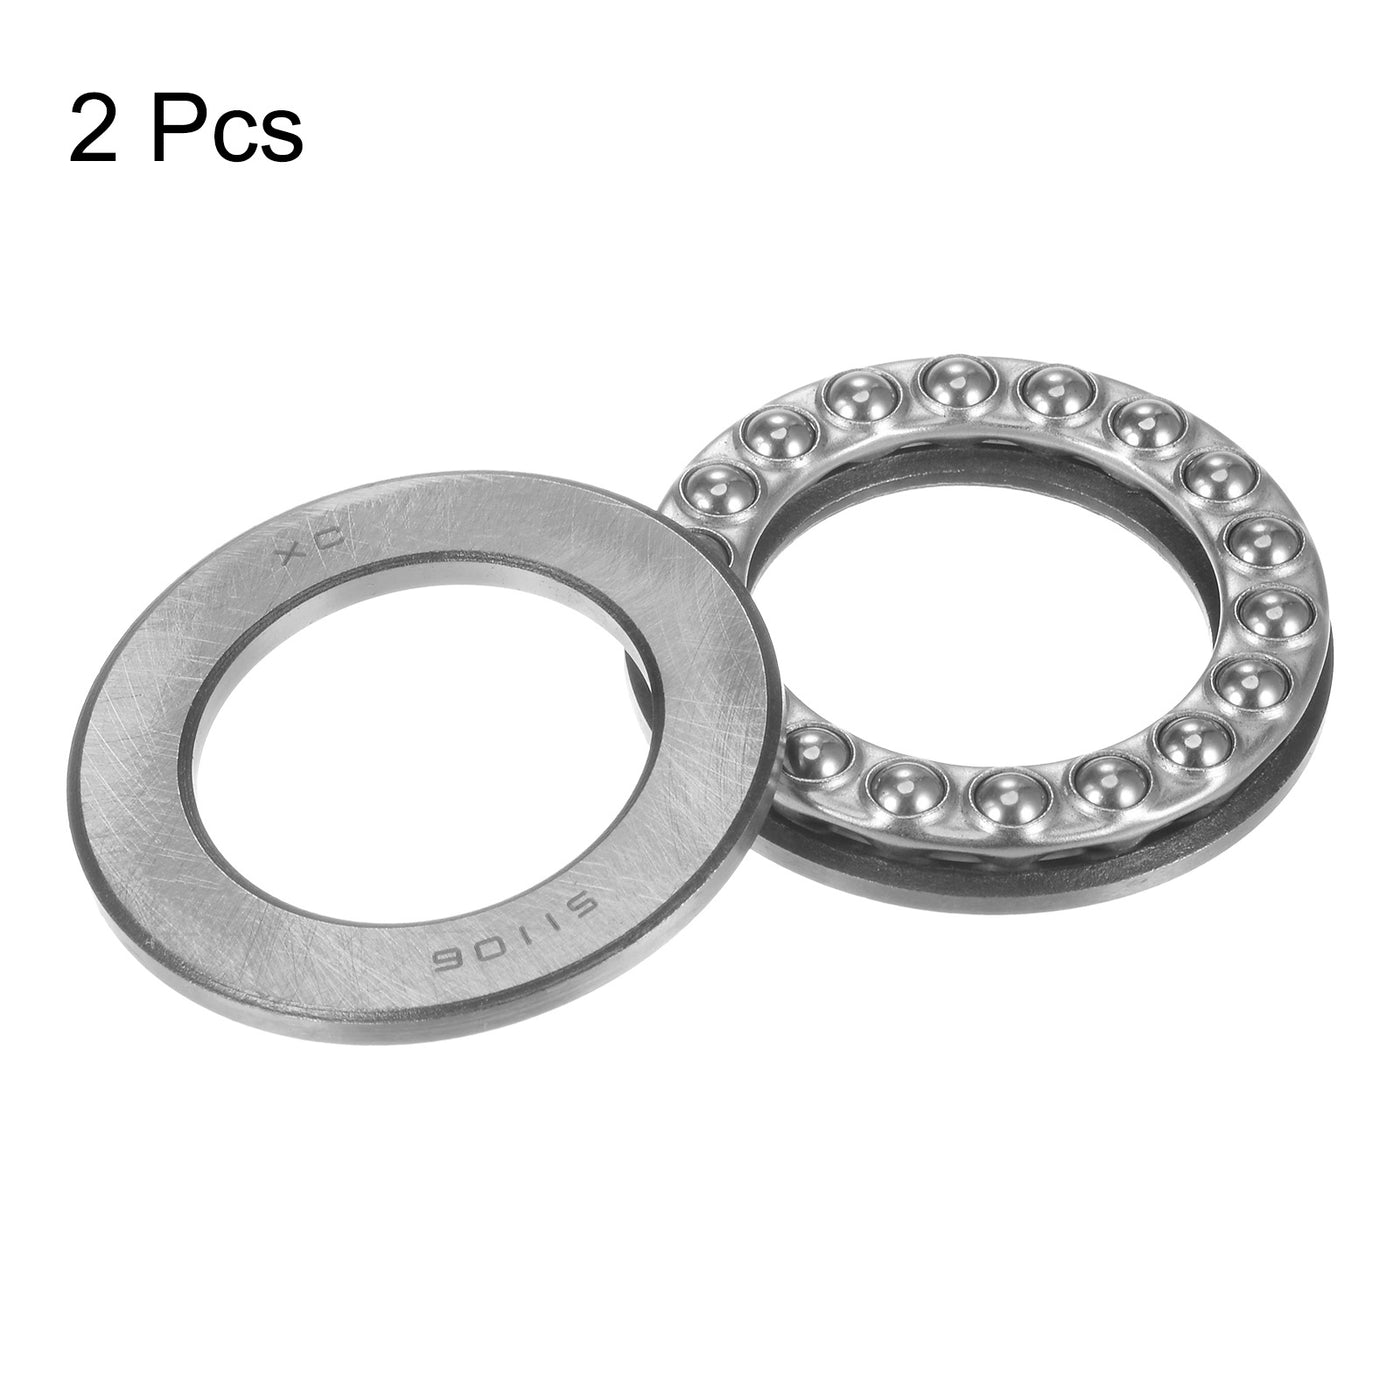 uxcell Uxcell 51106 Thrust Ball Bearing 30x47x11mm High Carbon Steel with Washers 2pcs